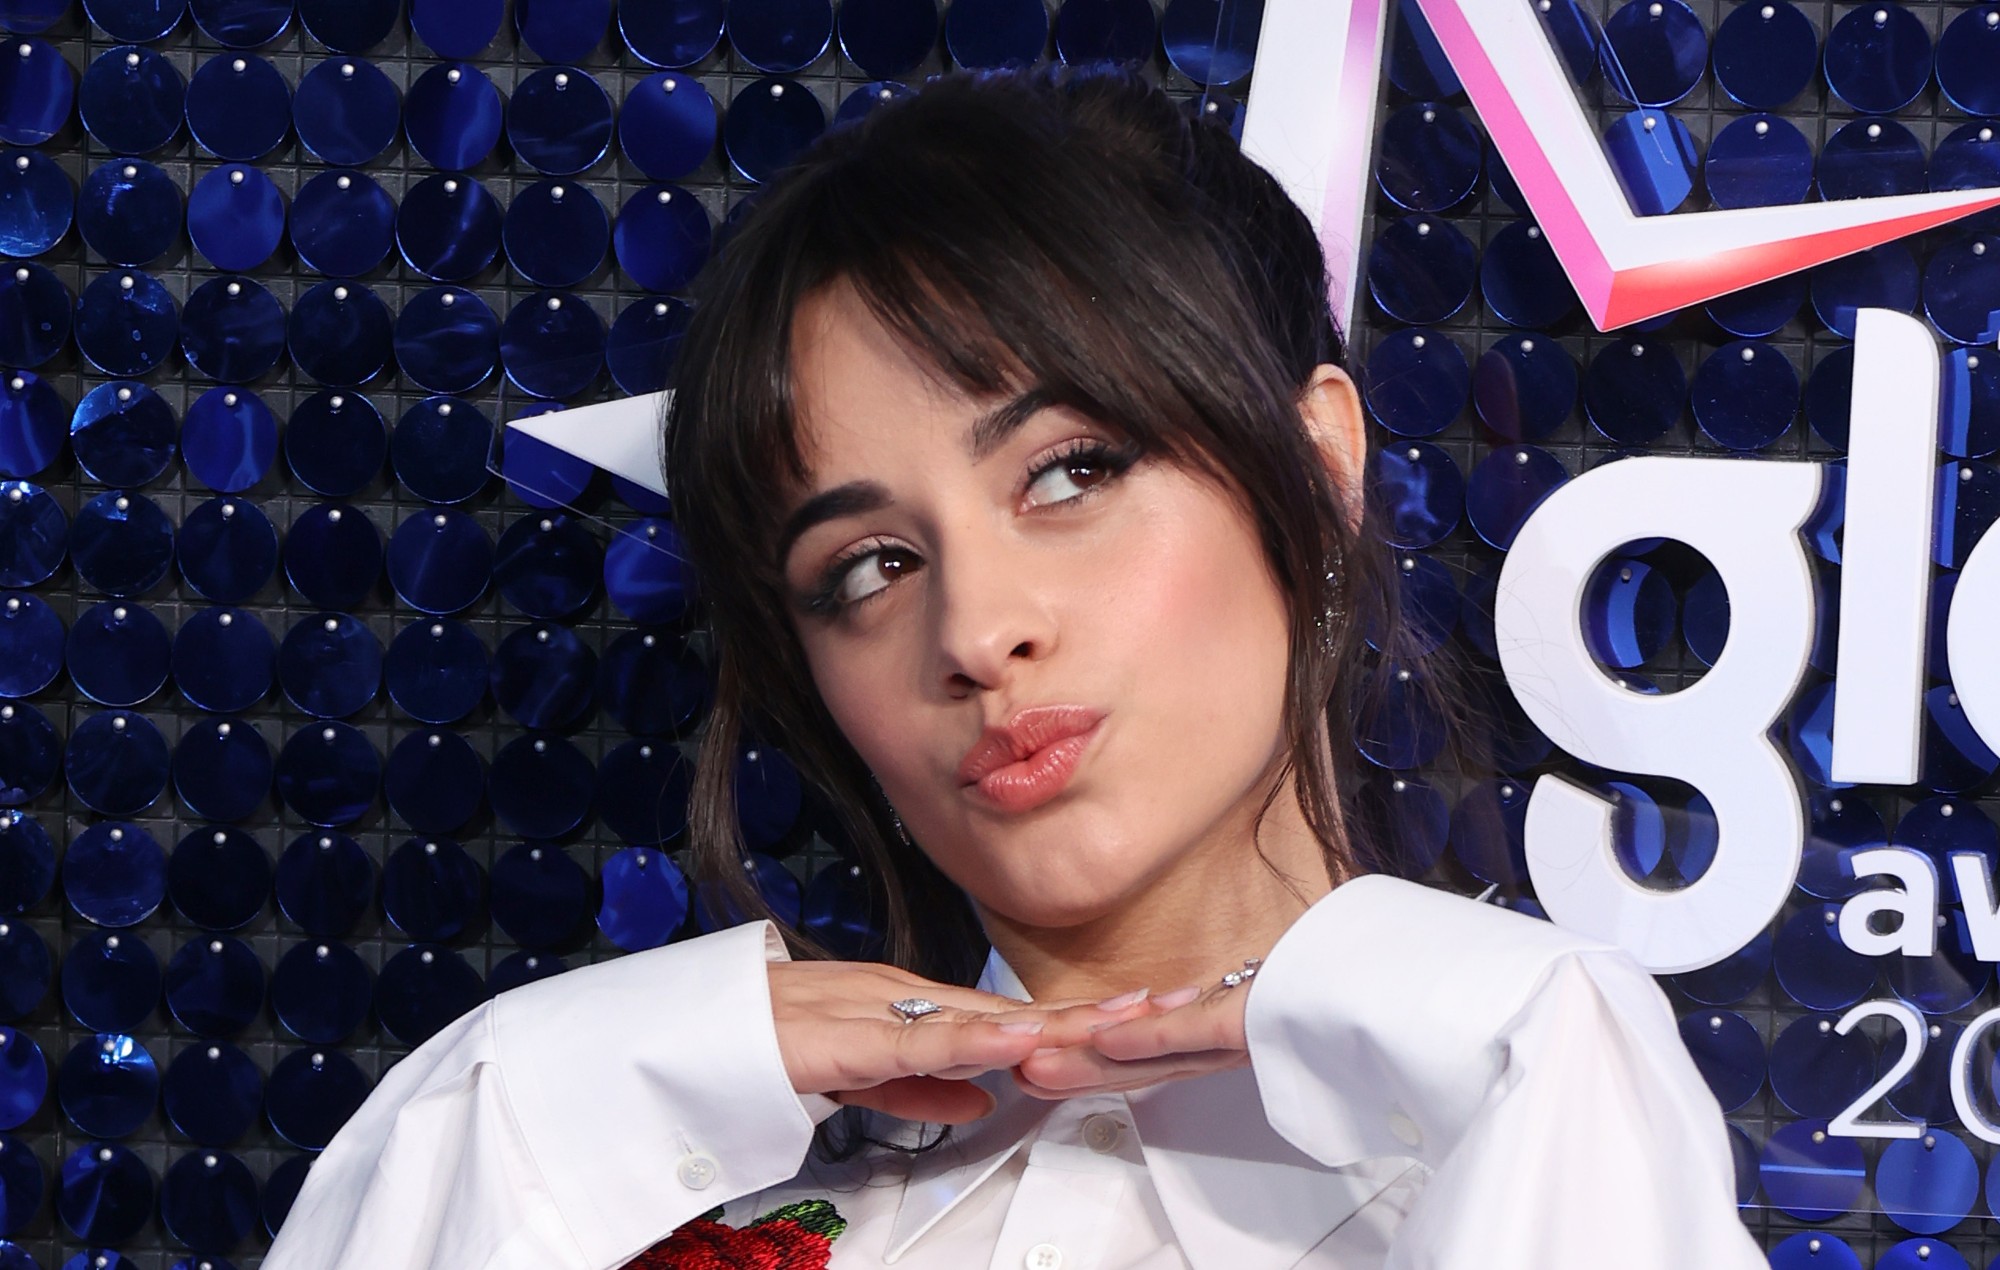 Camila Cabello teases 'Don't Go Yet', her first single in almost two years